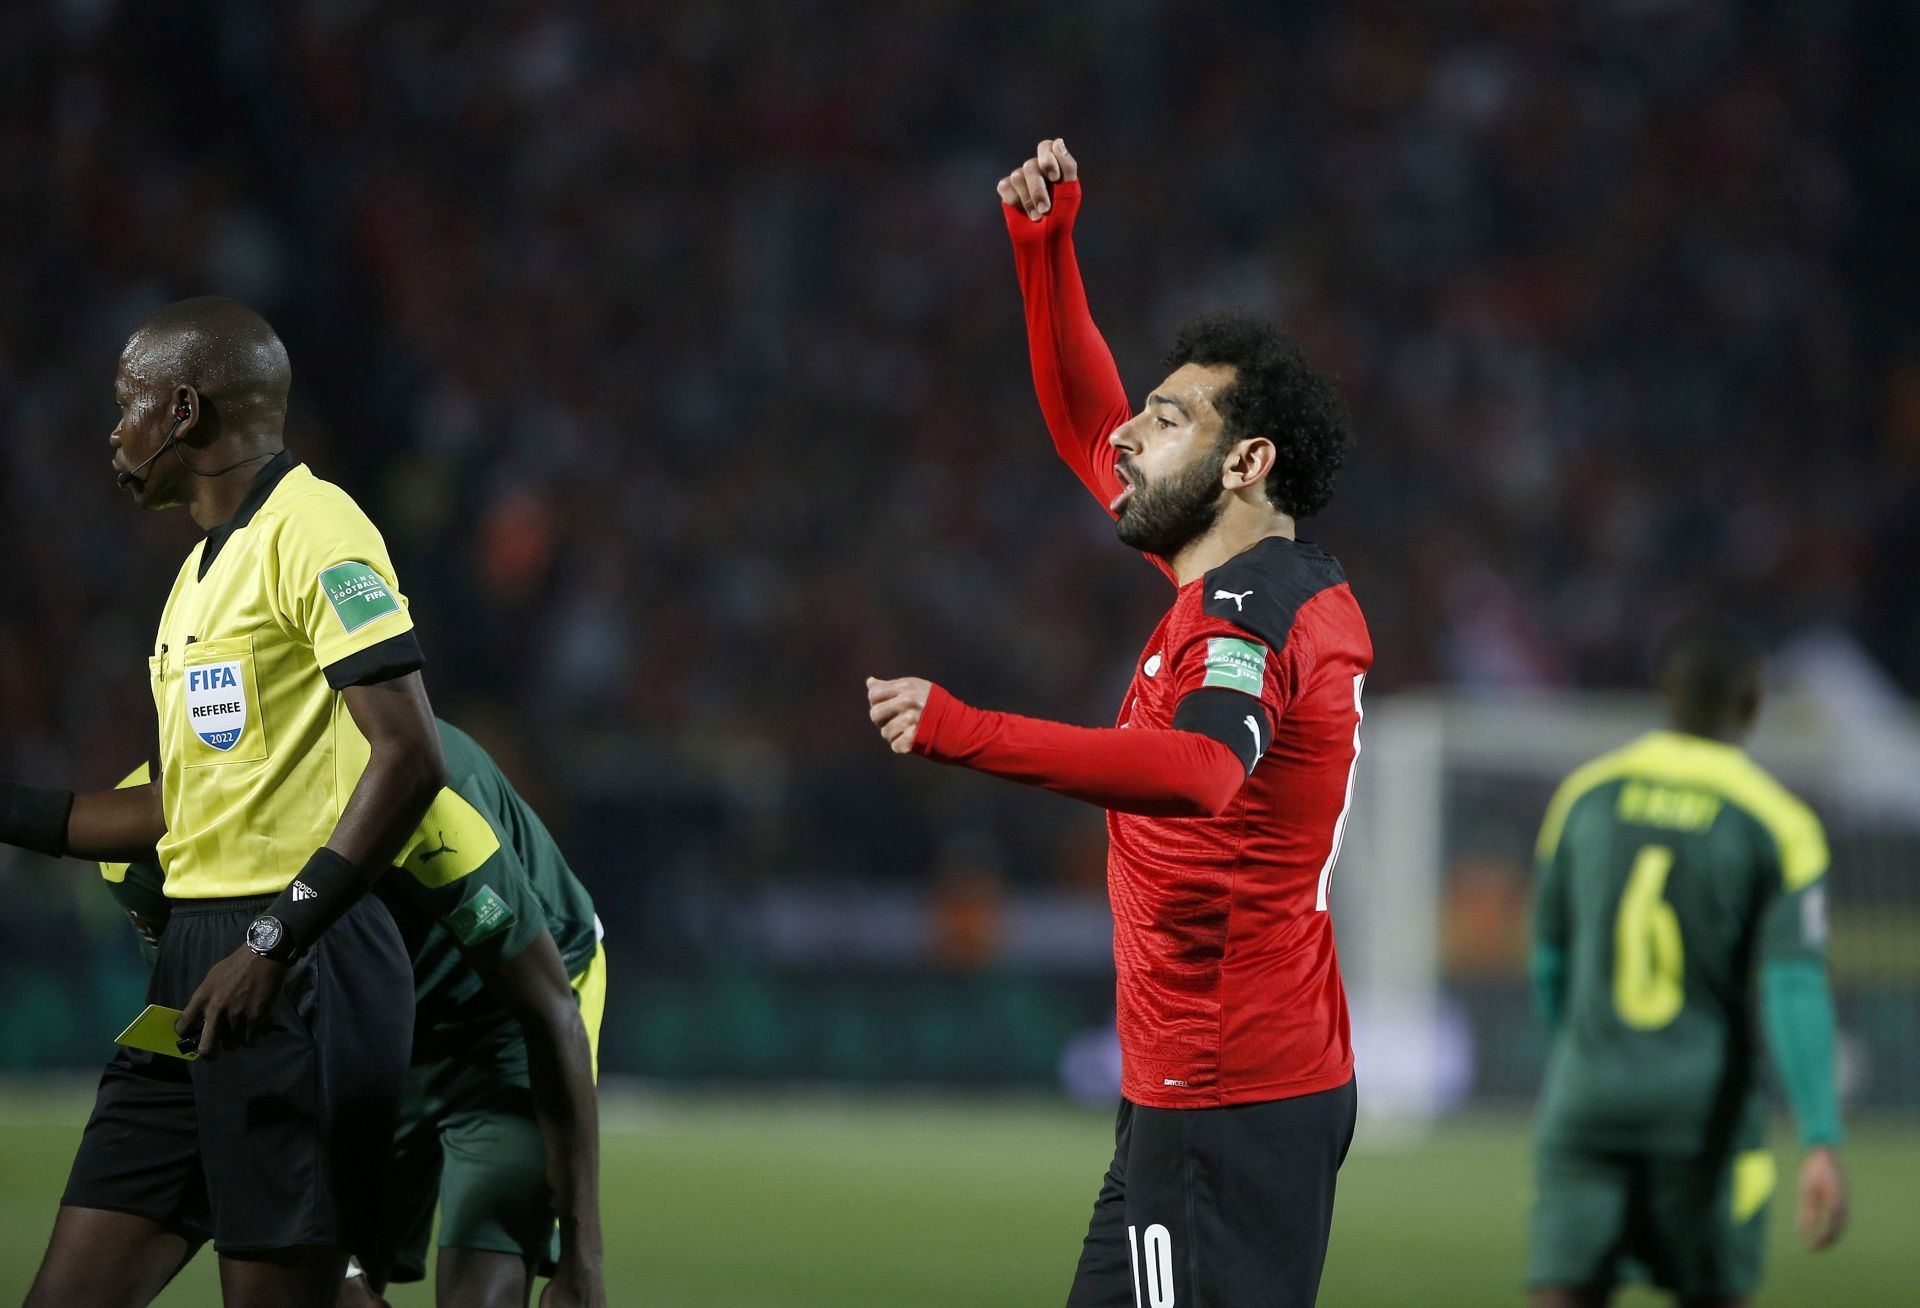 Egypt will face Senegal on Tuesday - FIFA World Cup Qatar 2022 Qualifier